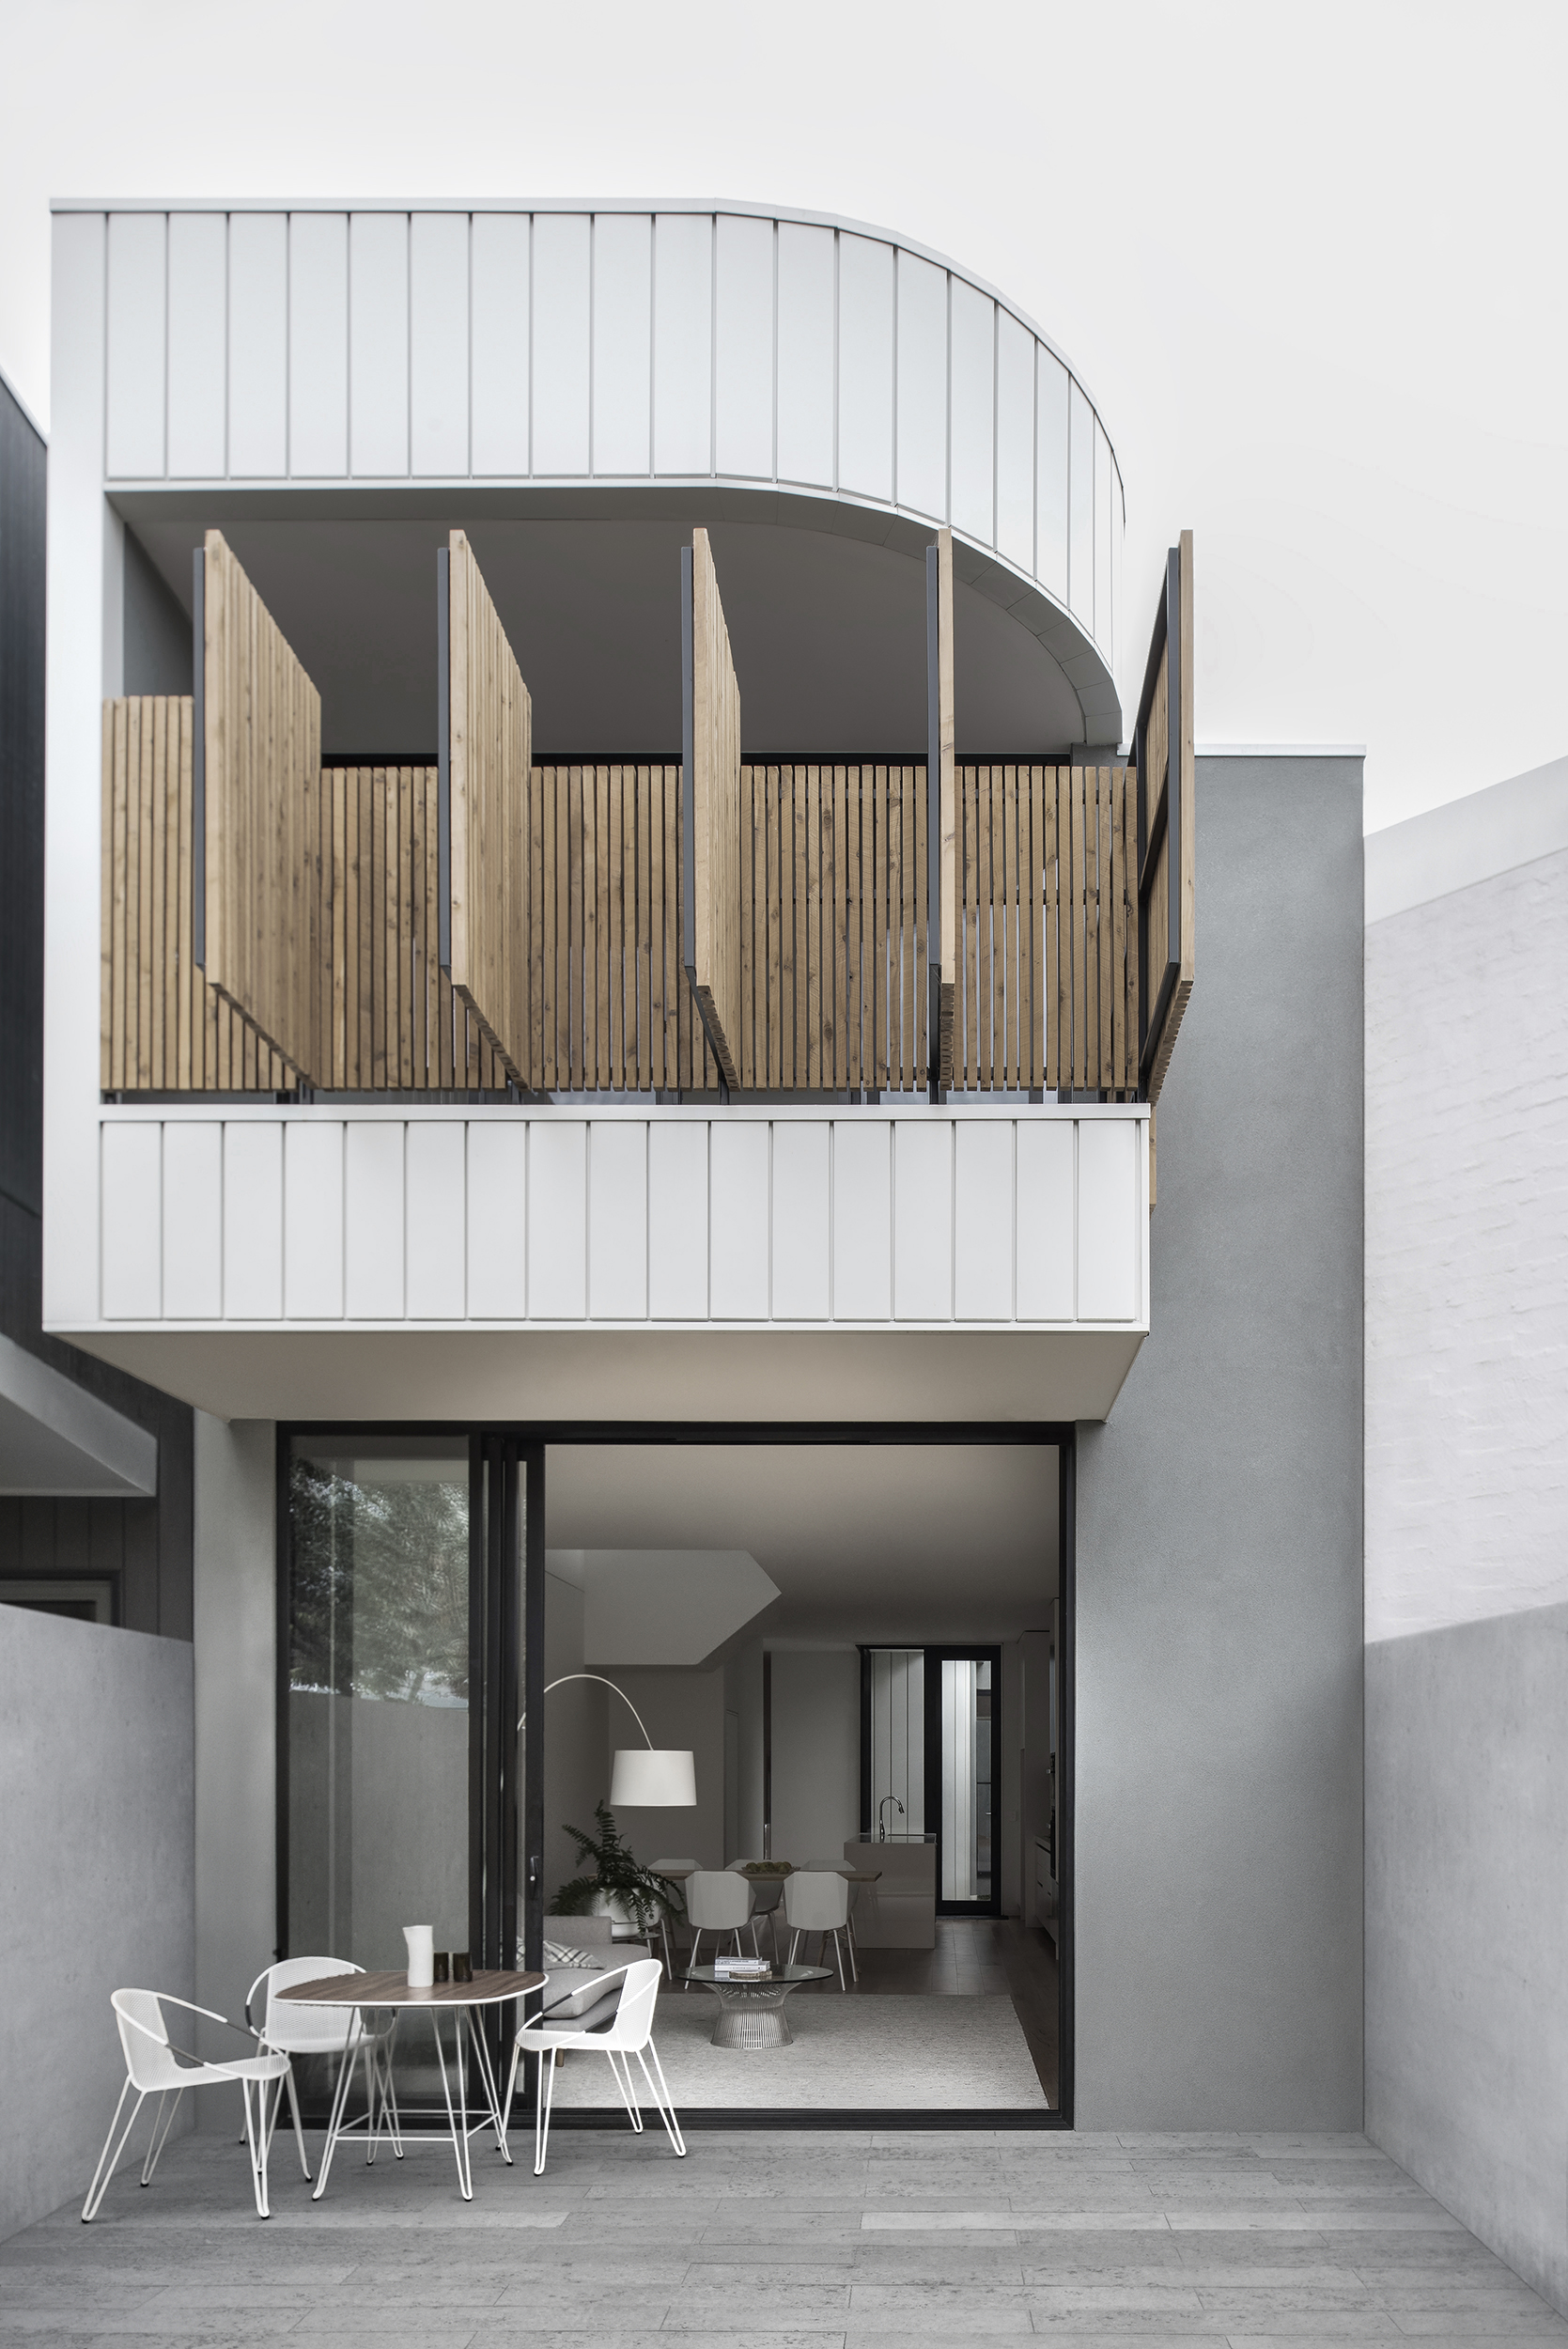 Winter Architecture_Port Melbourne House_Photography by Nicole England_01.jpg